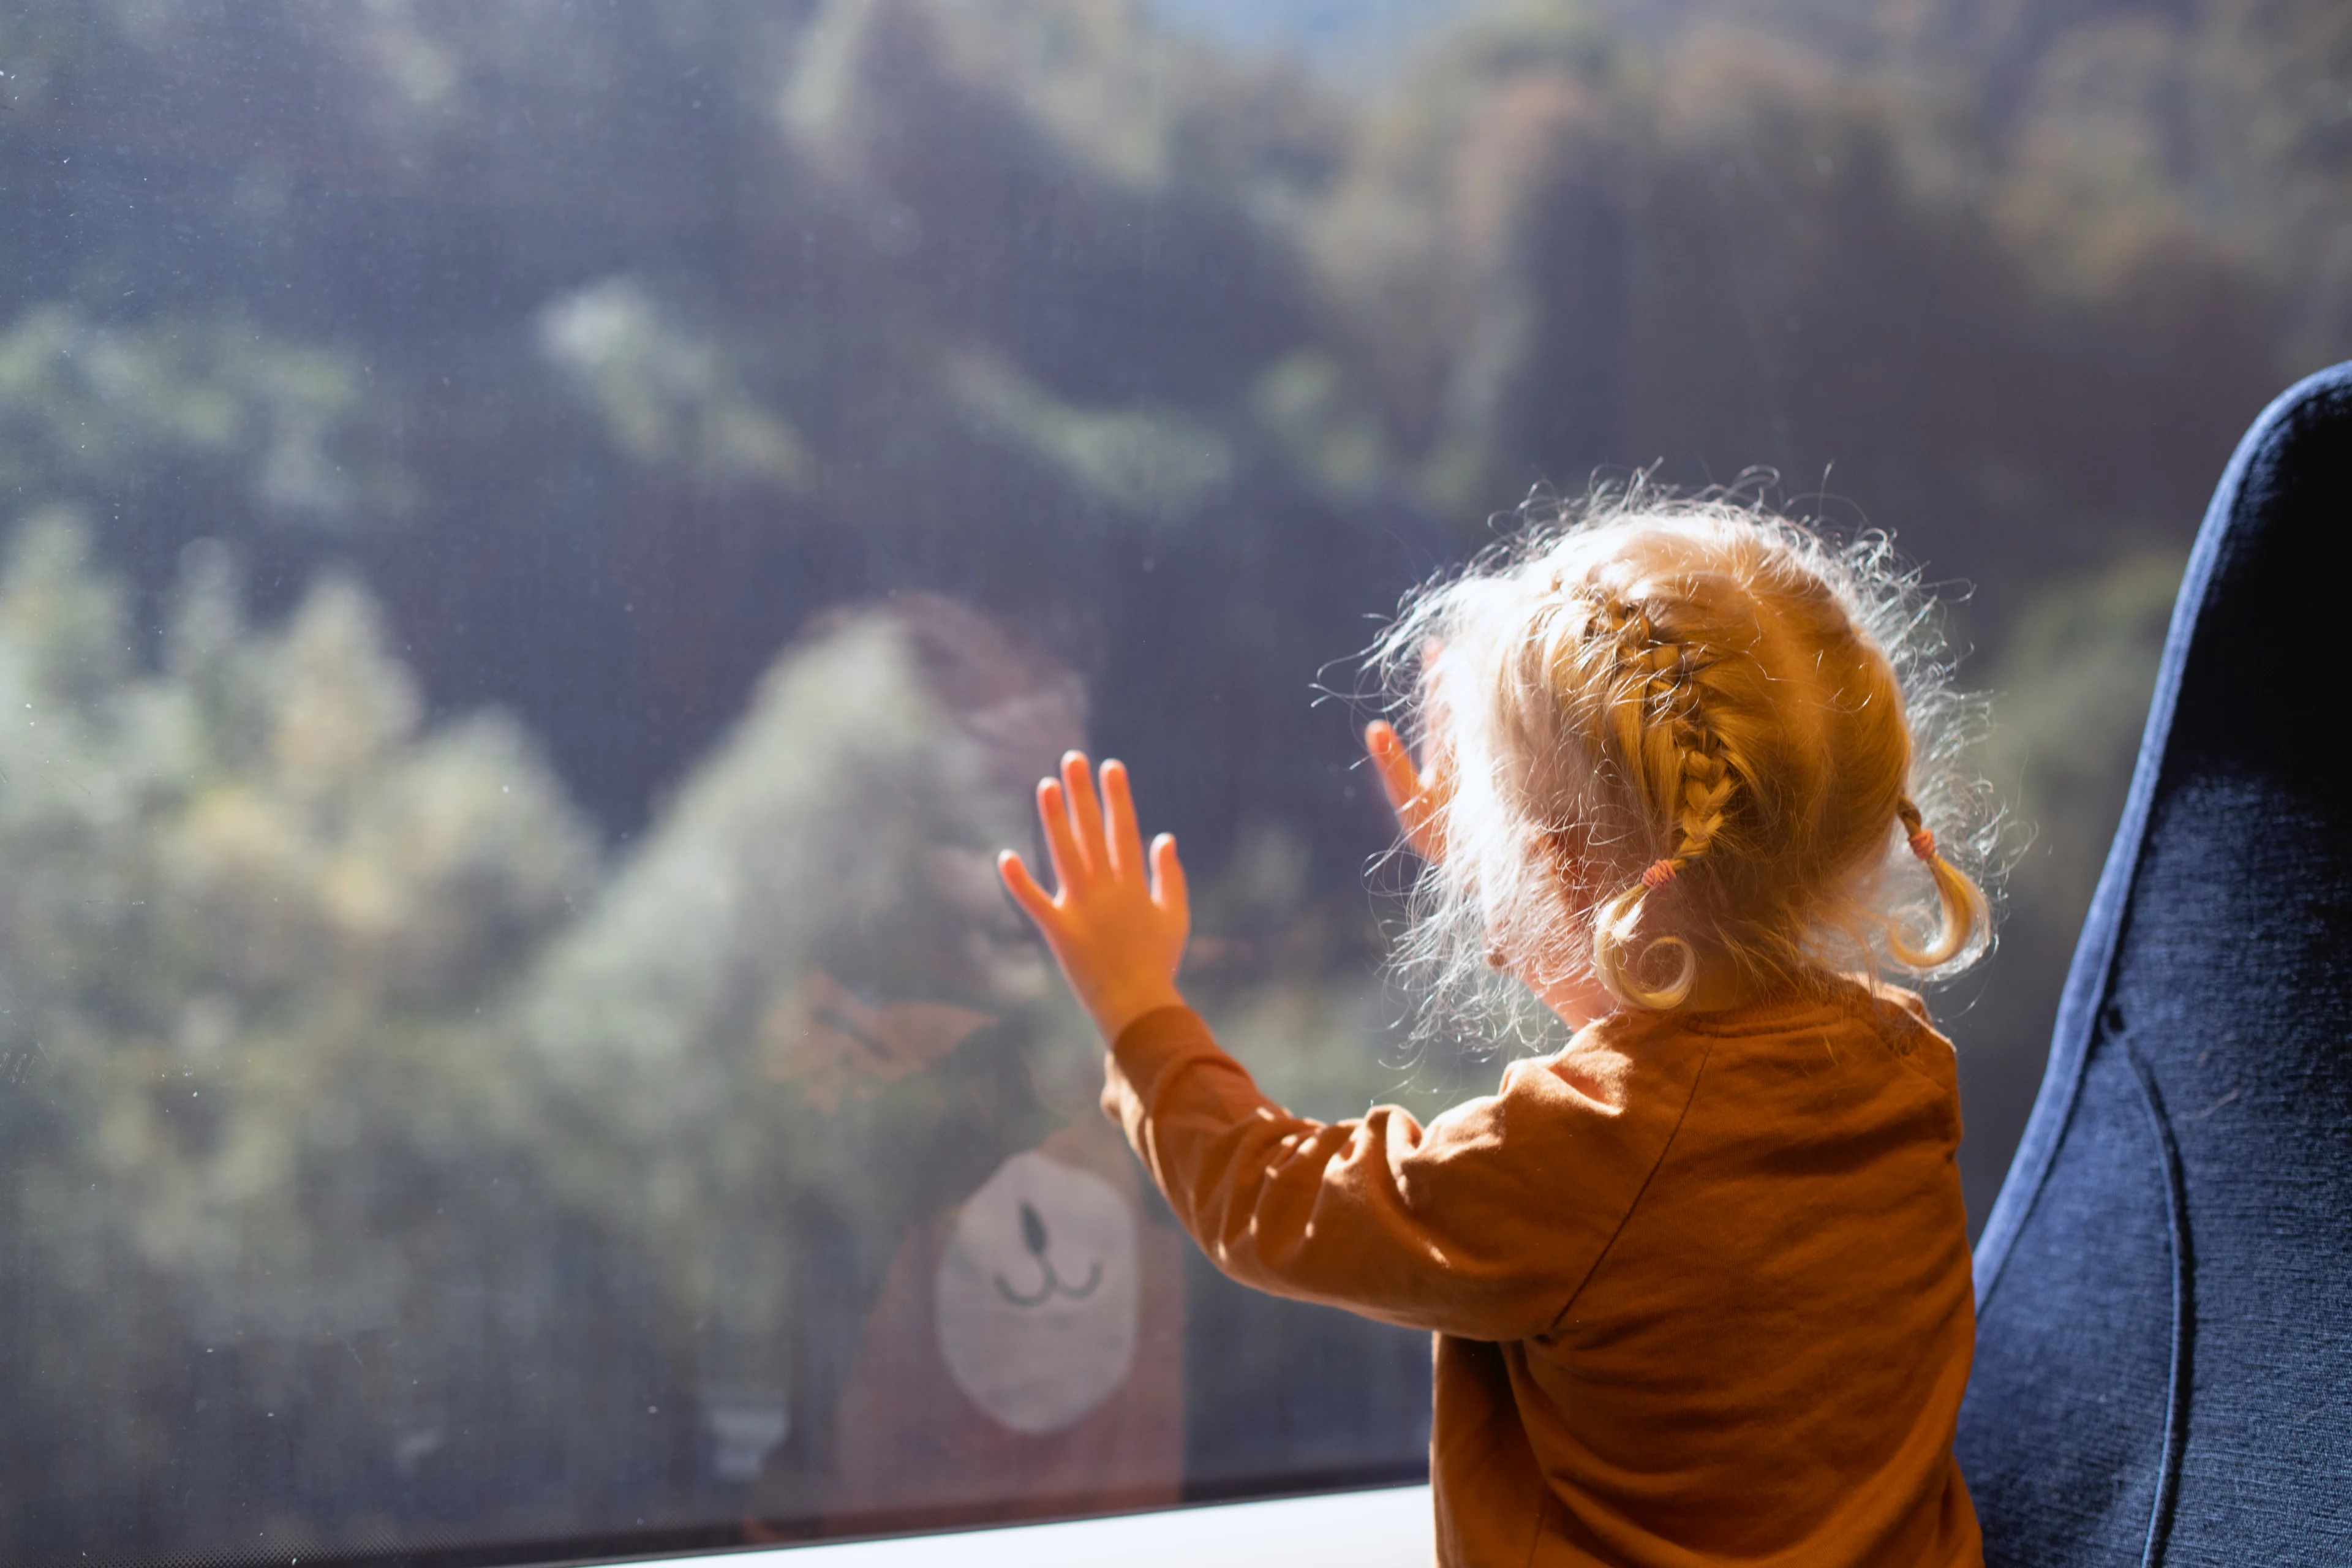 A young girl is reflected in a train window as she puts her hands on the glass to look out at the landscape